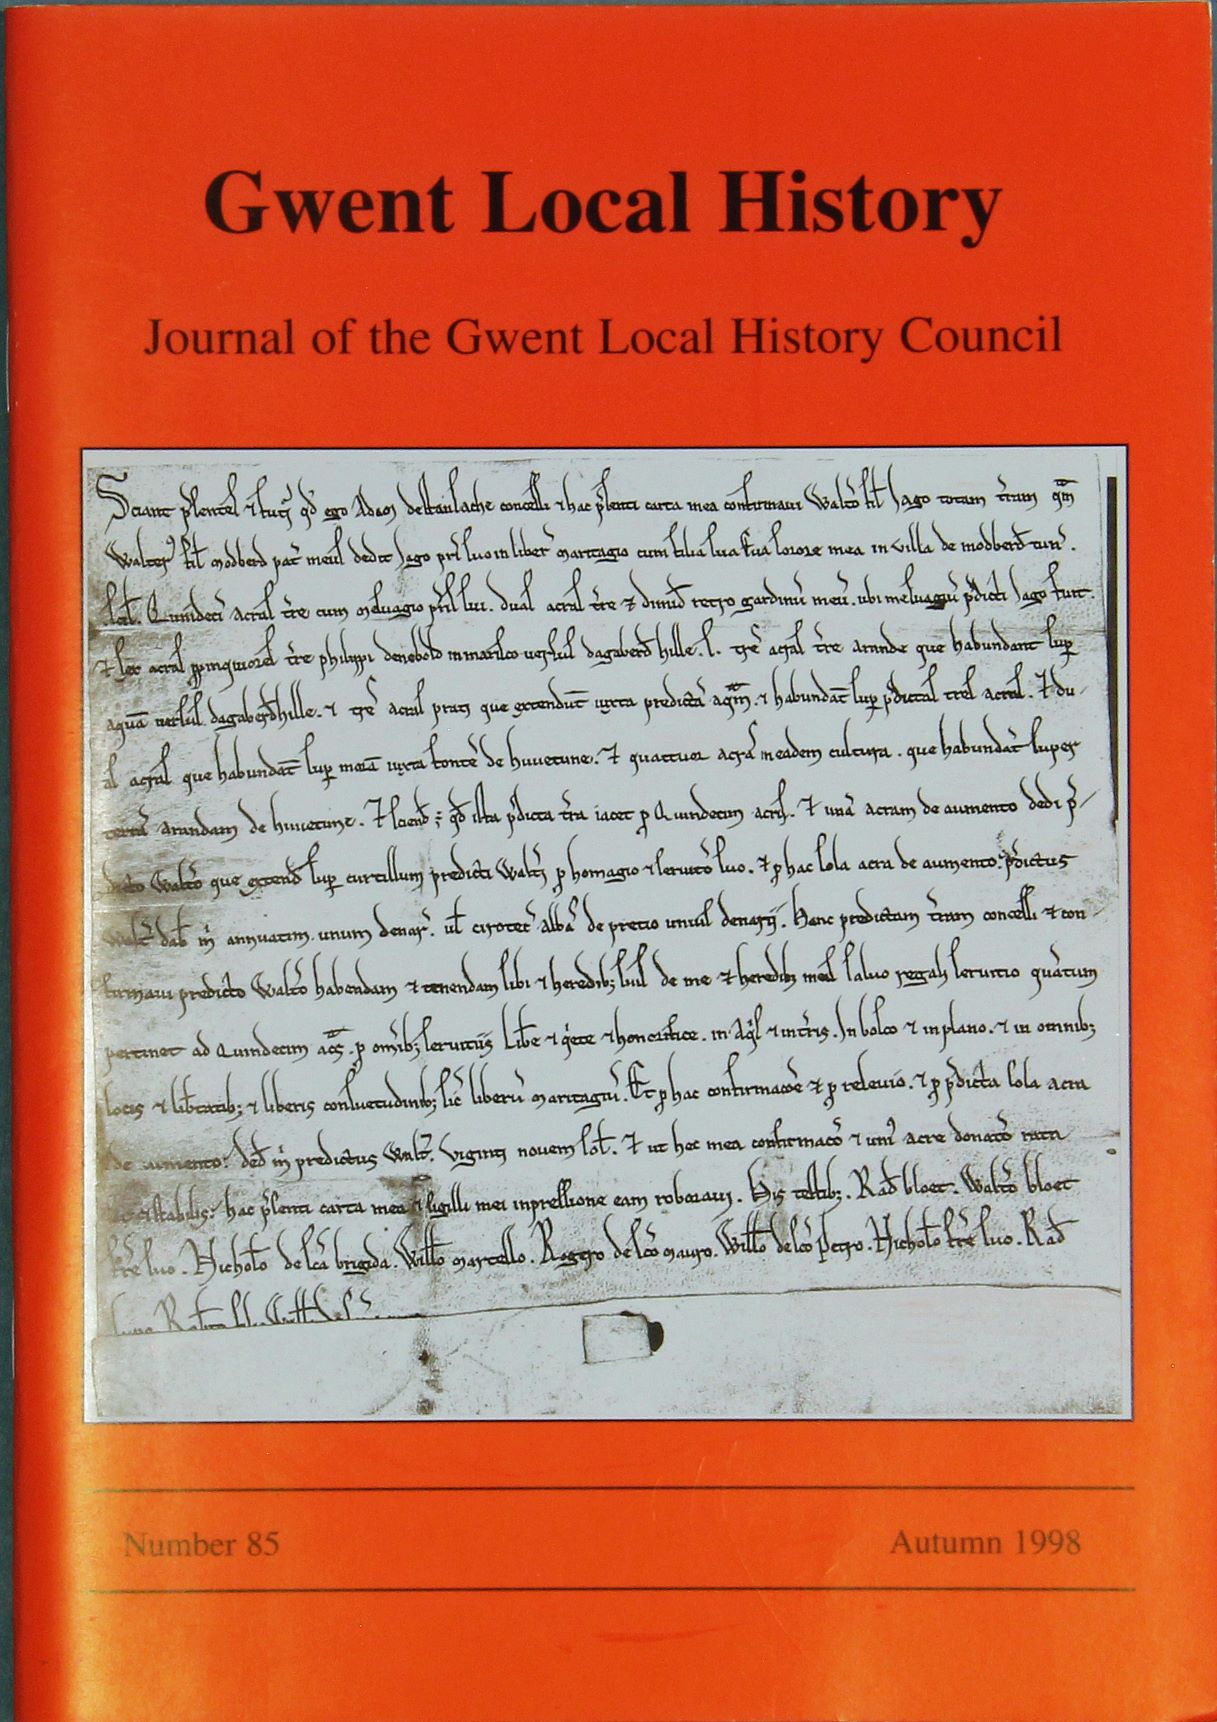 Gwent Local History: Journal of the Gwent Local History Council No.85, Autumn 1998, £2.00